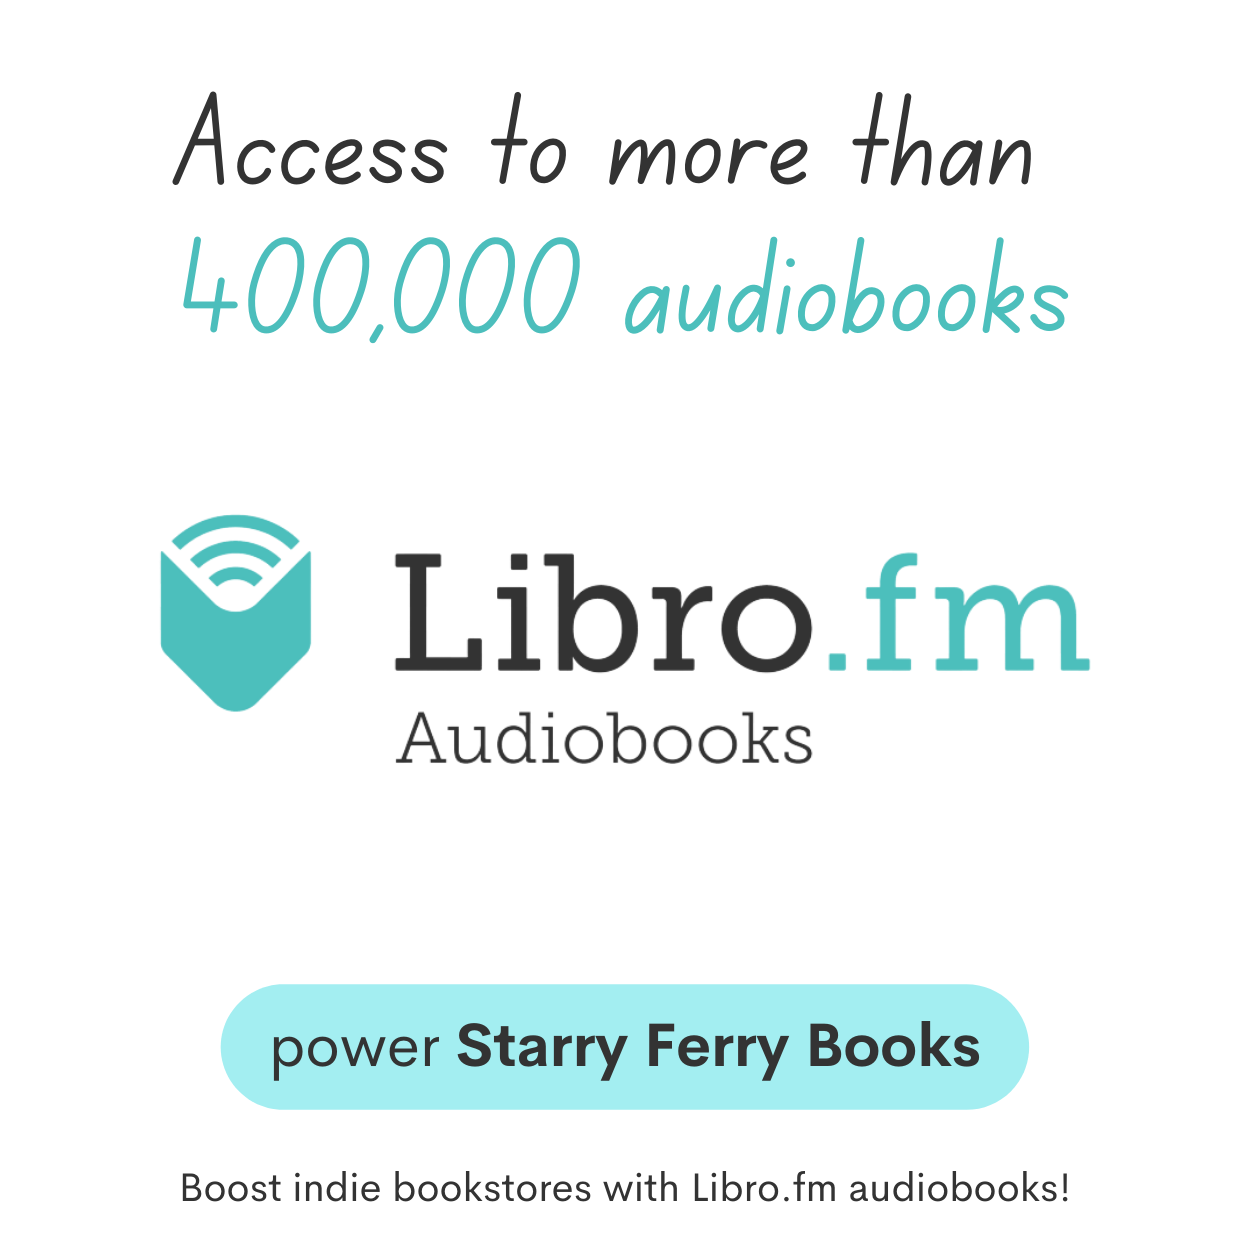 Power Starry Ferry Books! Access to more than 400,000 audiobooks at libro.fm. Support indie bookstores./